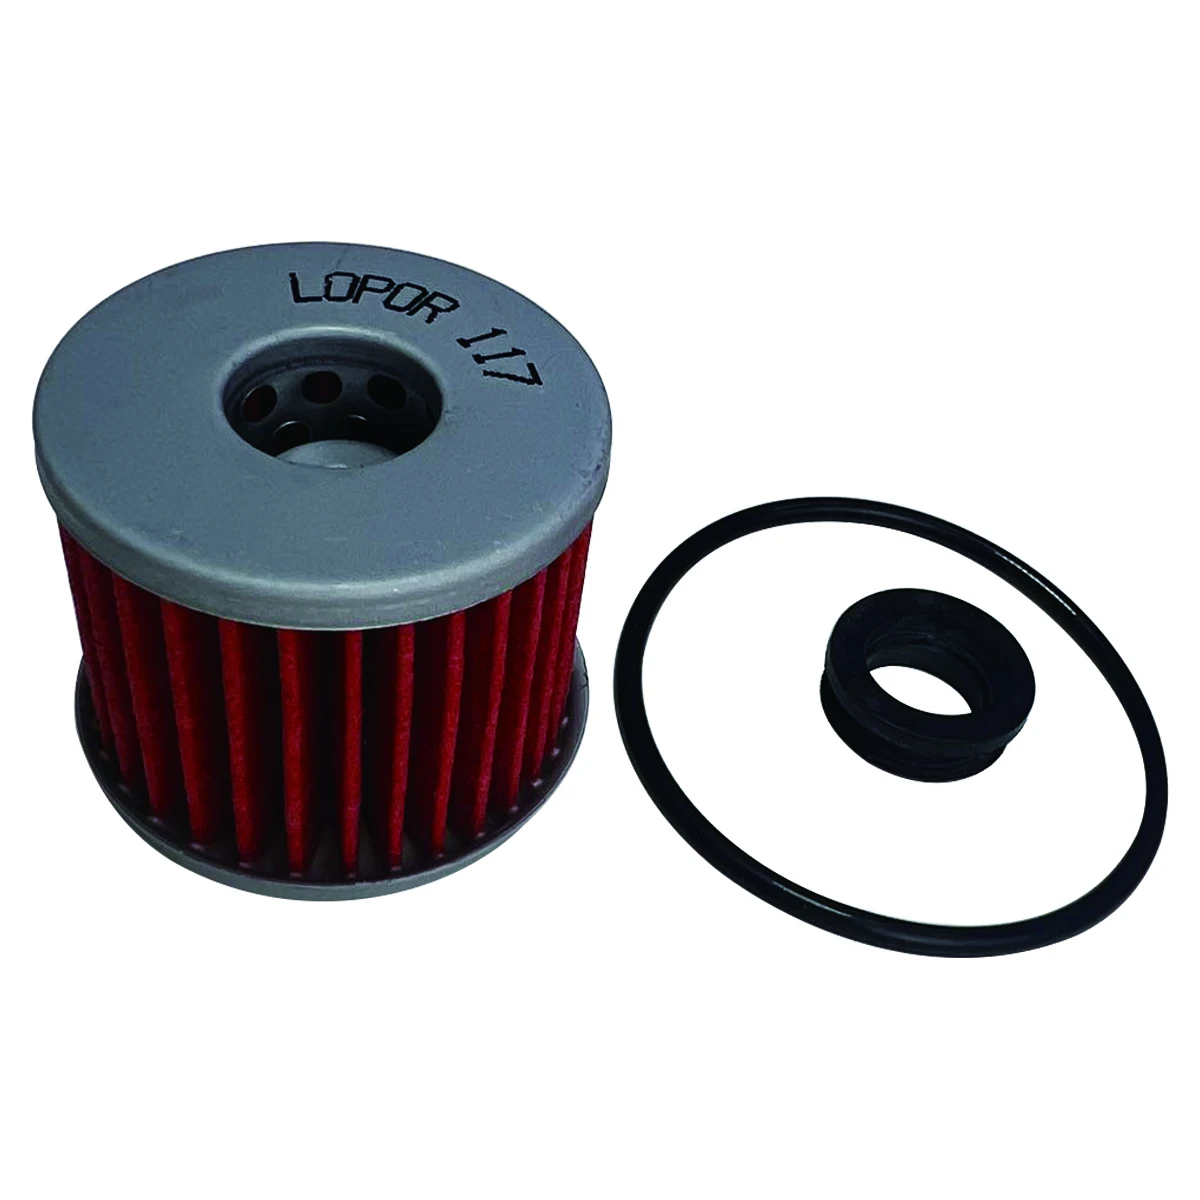 Motorcycle Oil Filter For Honda Scooter C125 A Super Cub 700 Integra NSS... - $21.47+